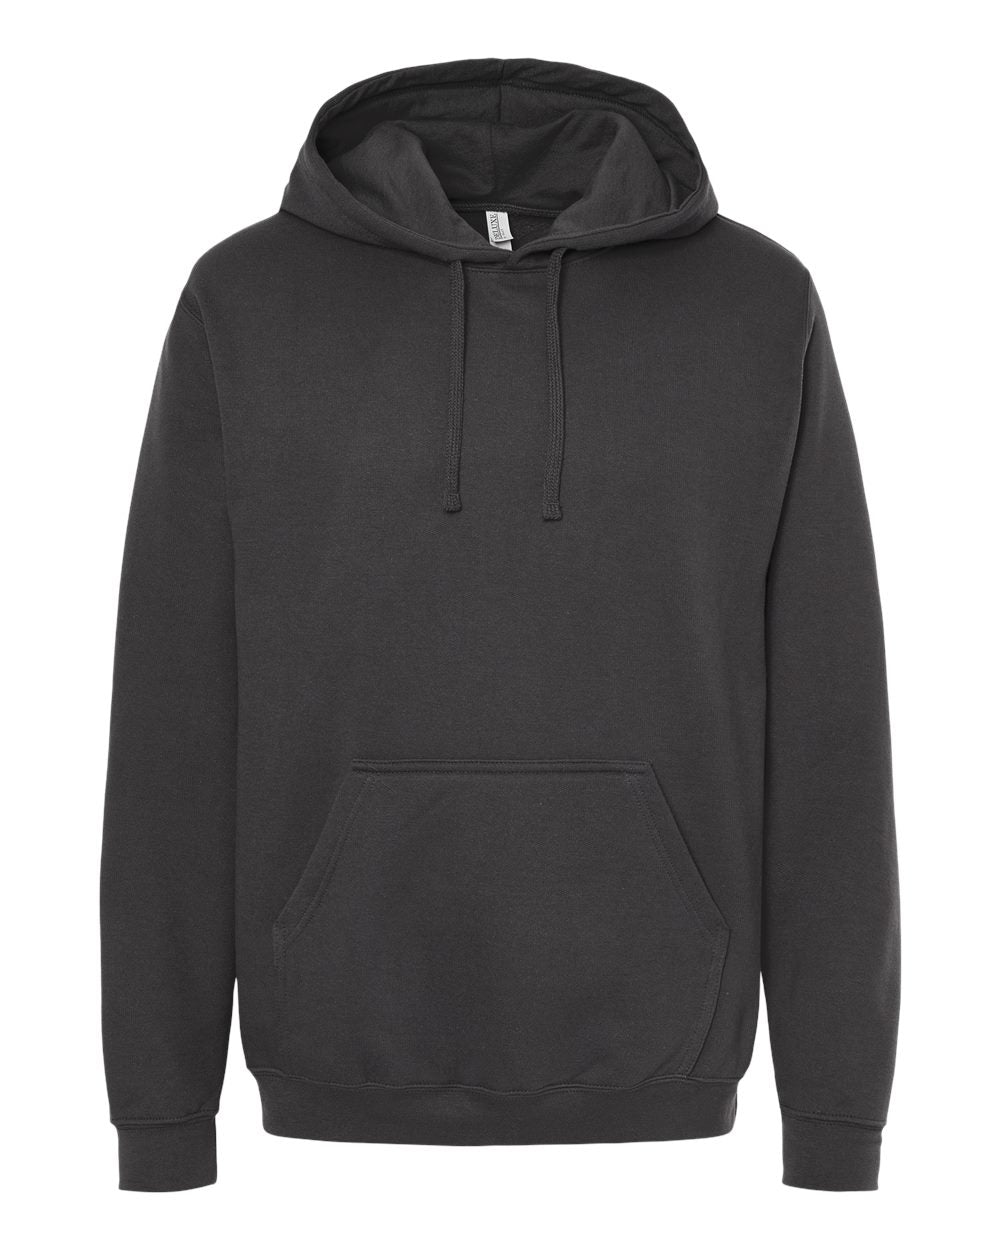 M&O Unisex Pullover Hoodie 3320 #color_Charcoal